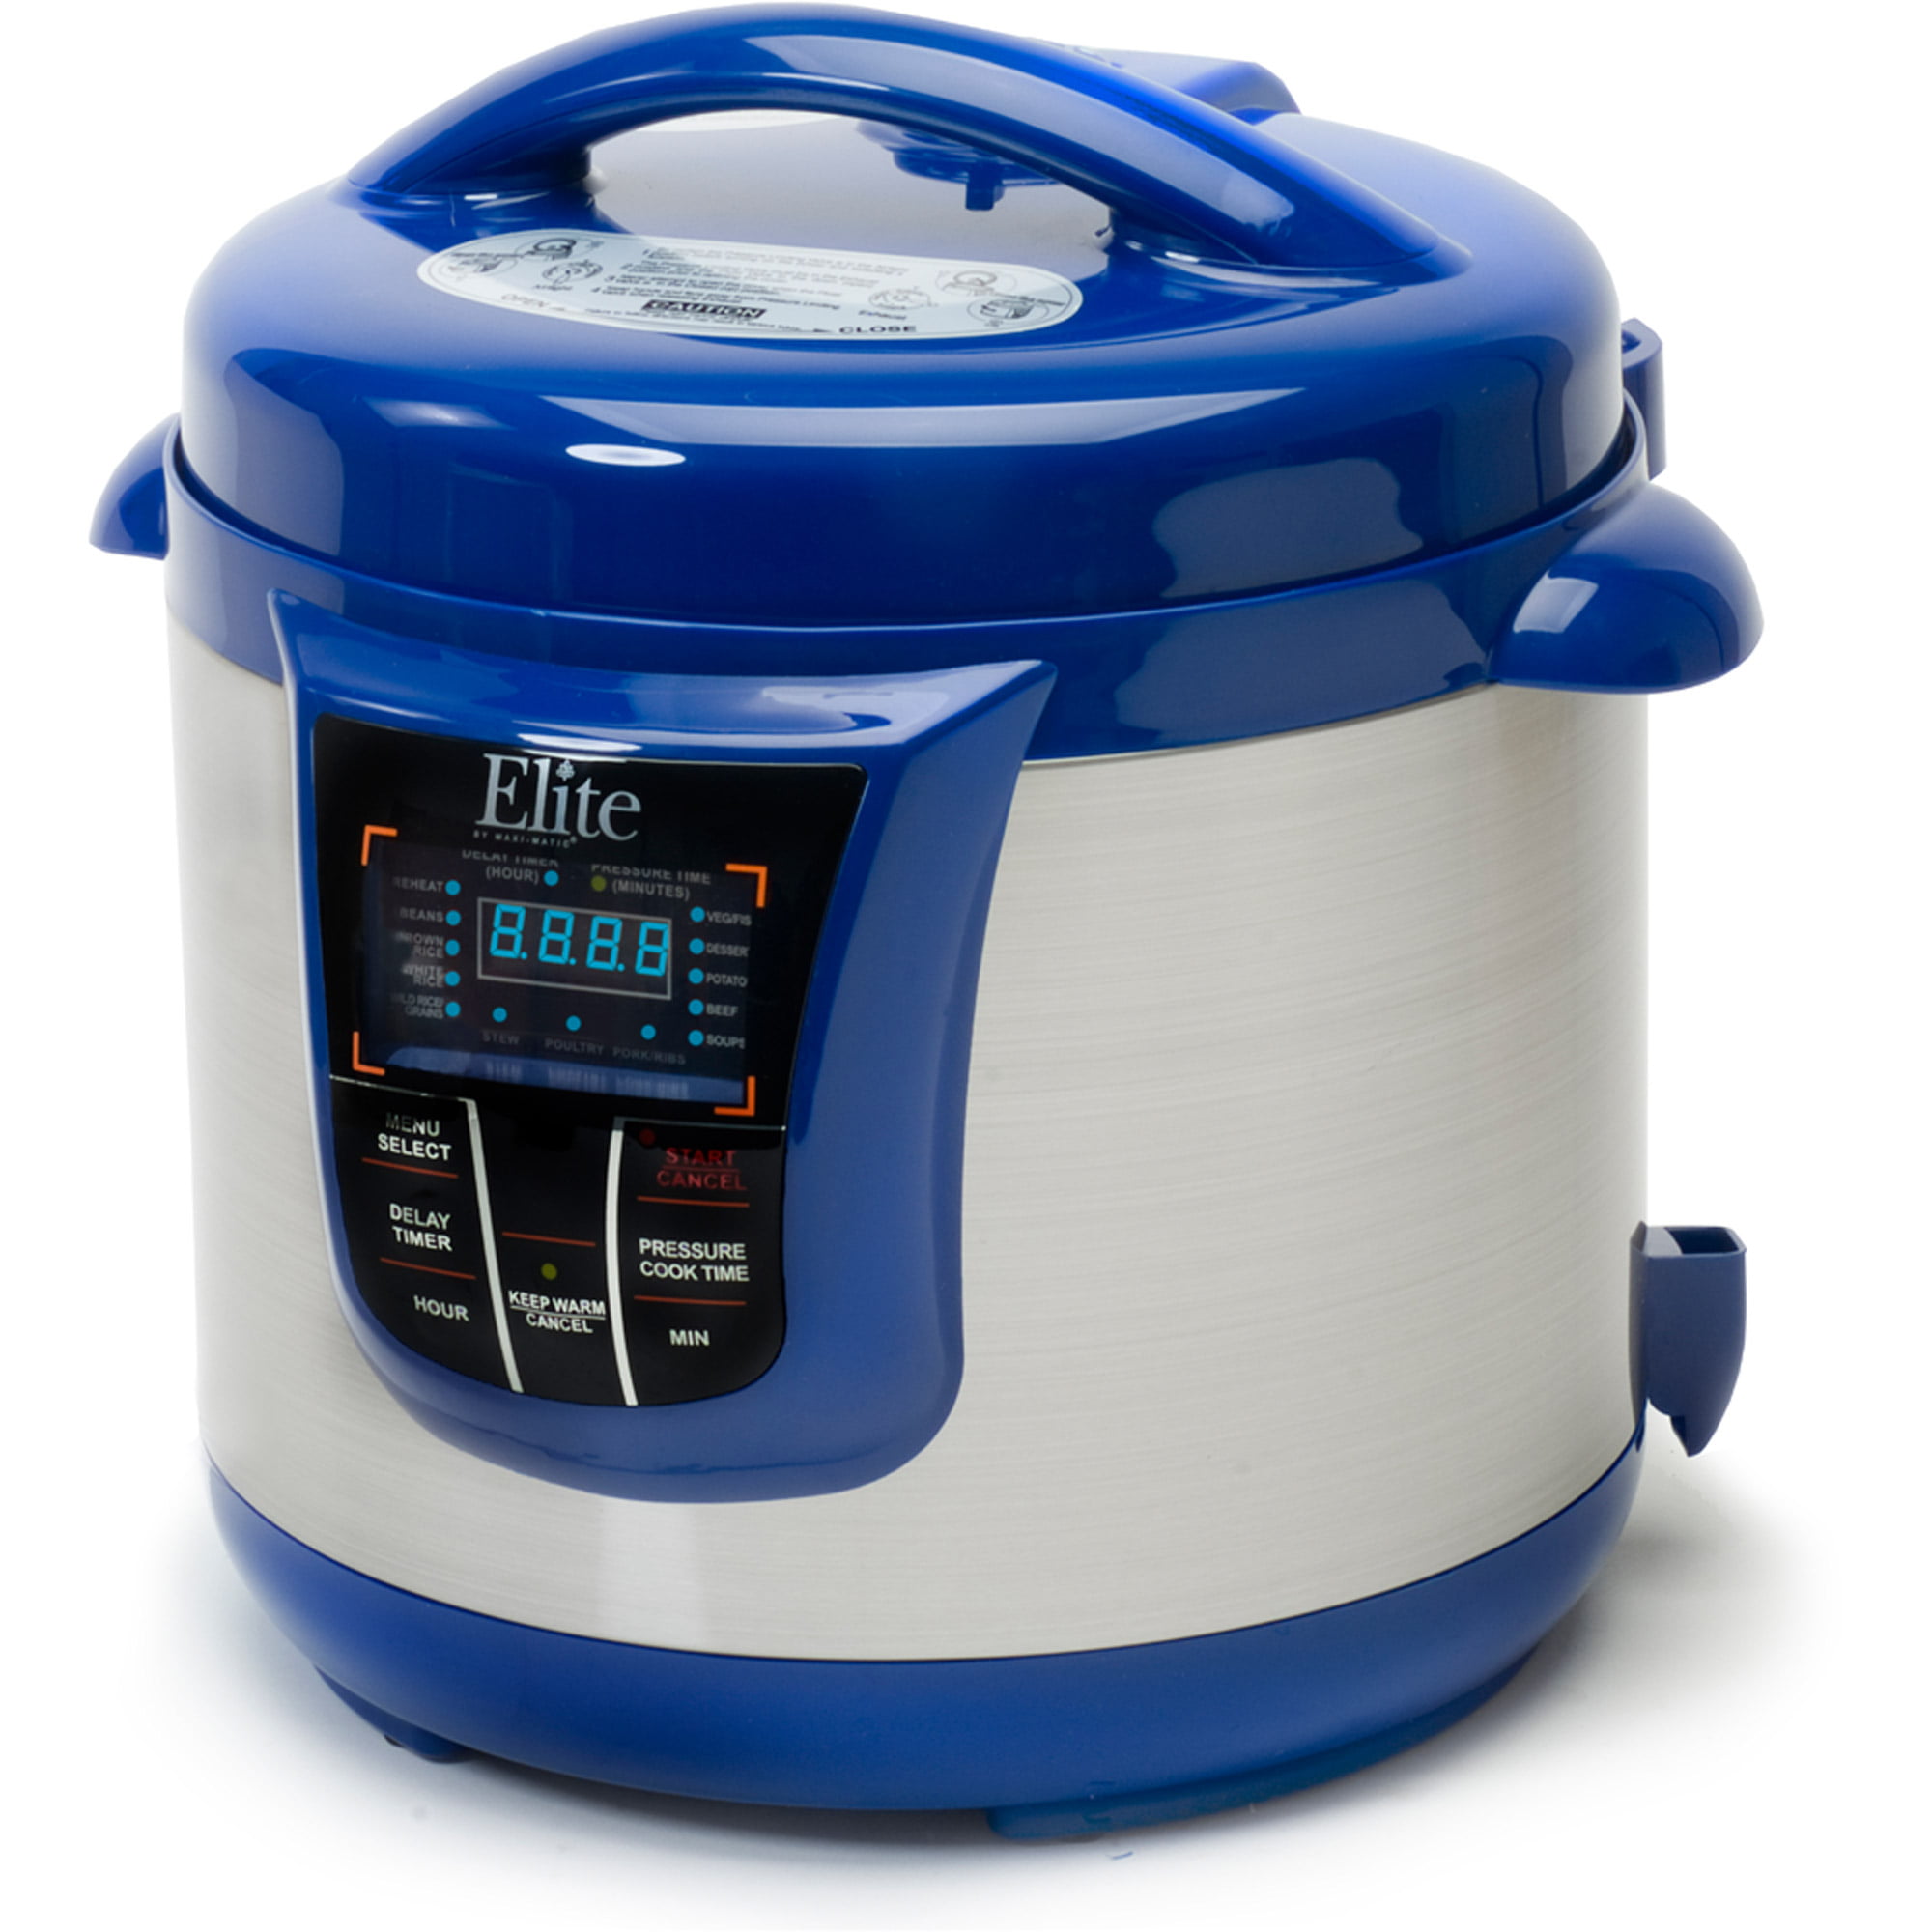 Cooks Anodized 8 Qt Pressure Cooker Y22-4(6)-00